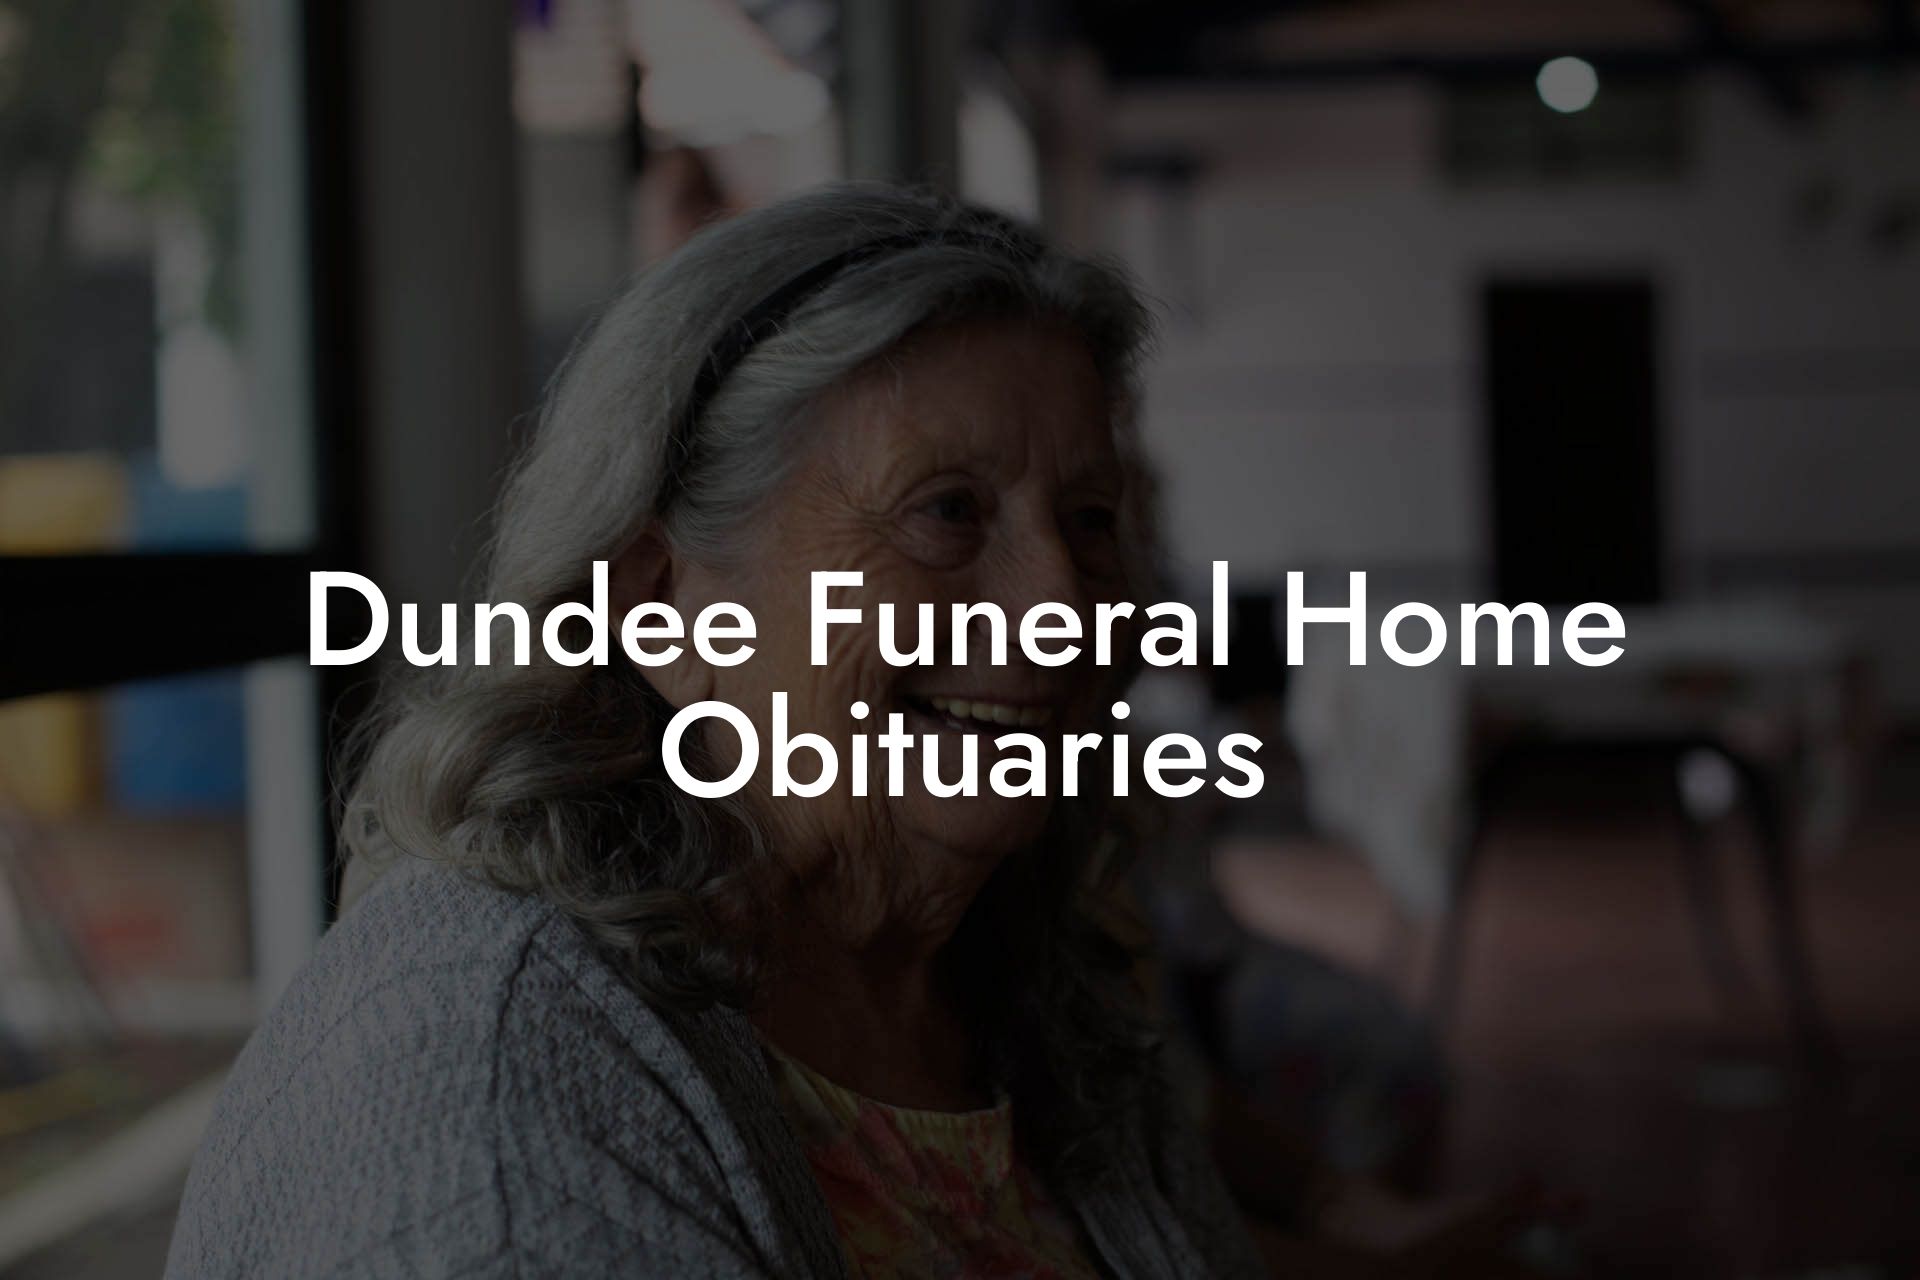 Dundee Funeral Home Obituaries